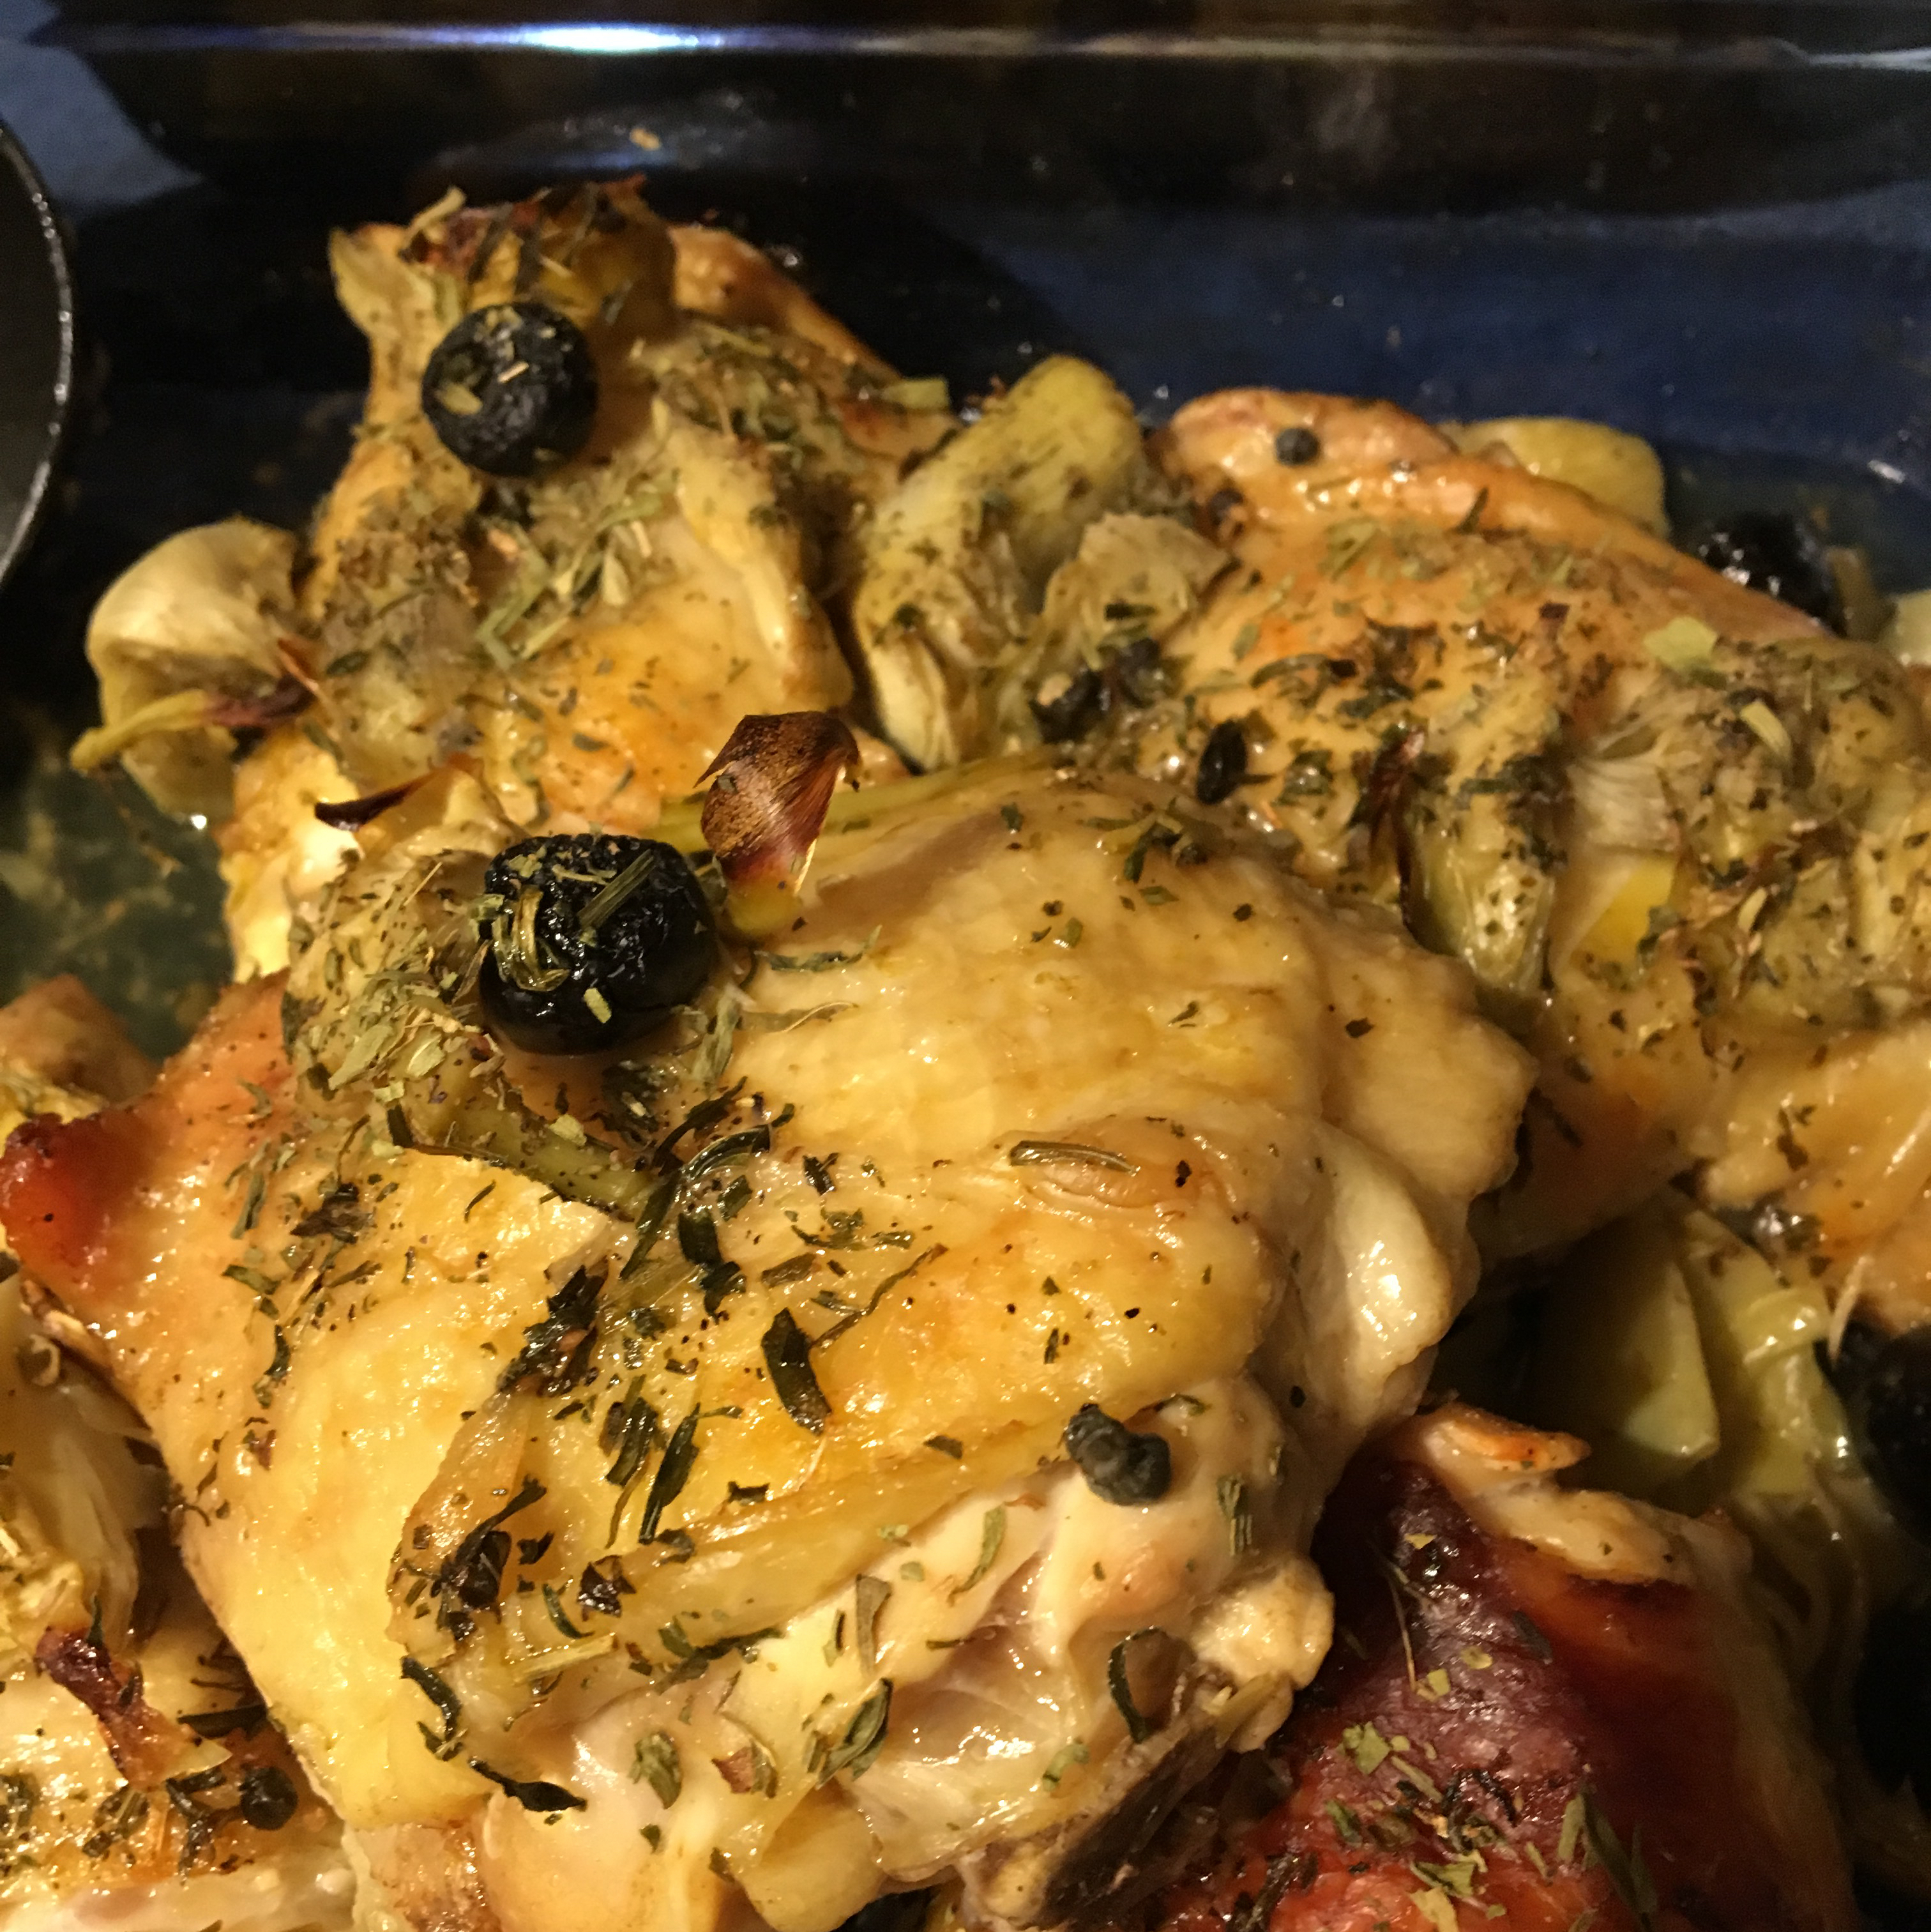 Artichoke and Black Olive Baked Chicken